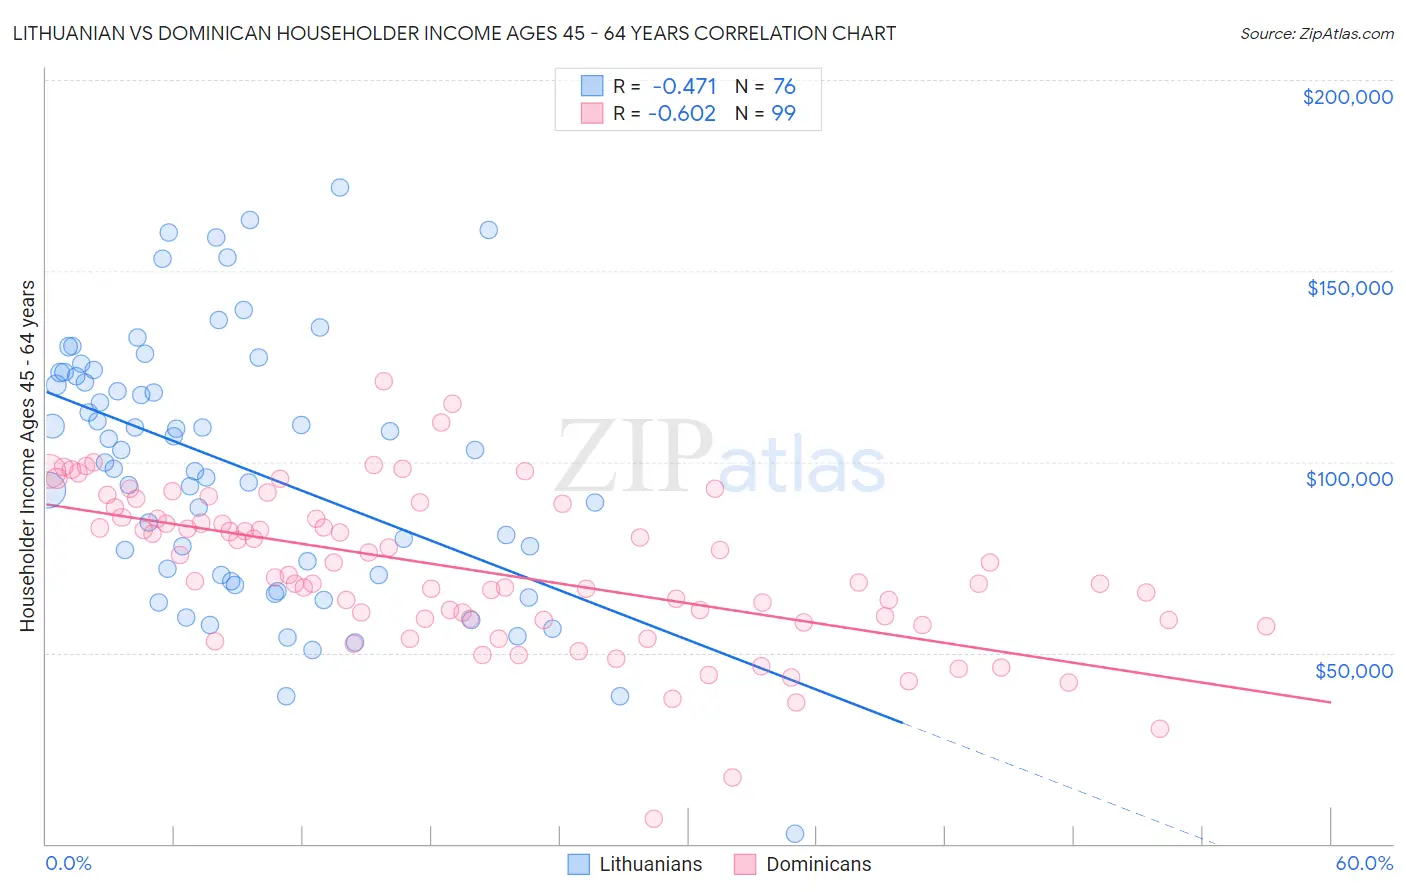 Lithuanian vs Dominican Householder Income Ages 45 - 64 years